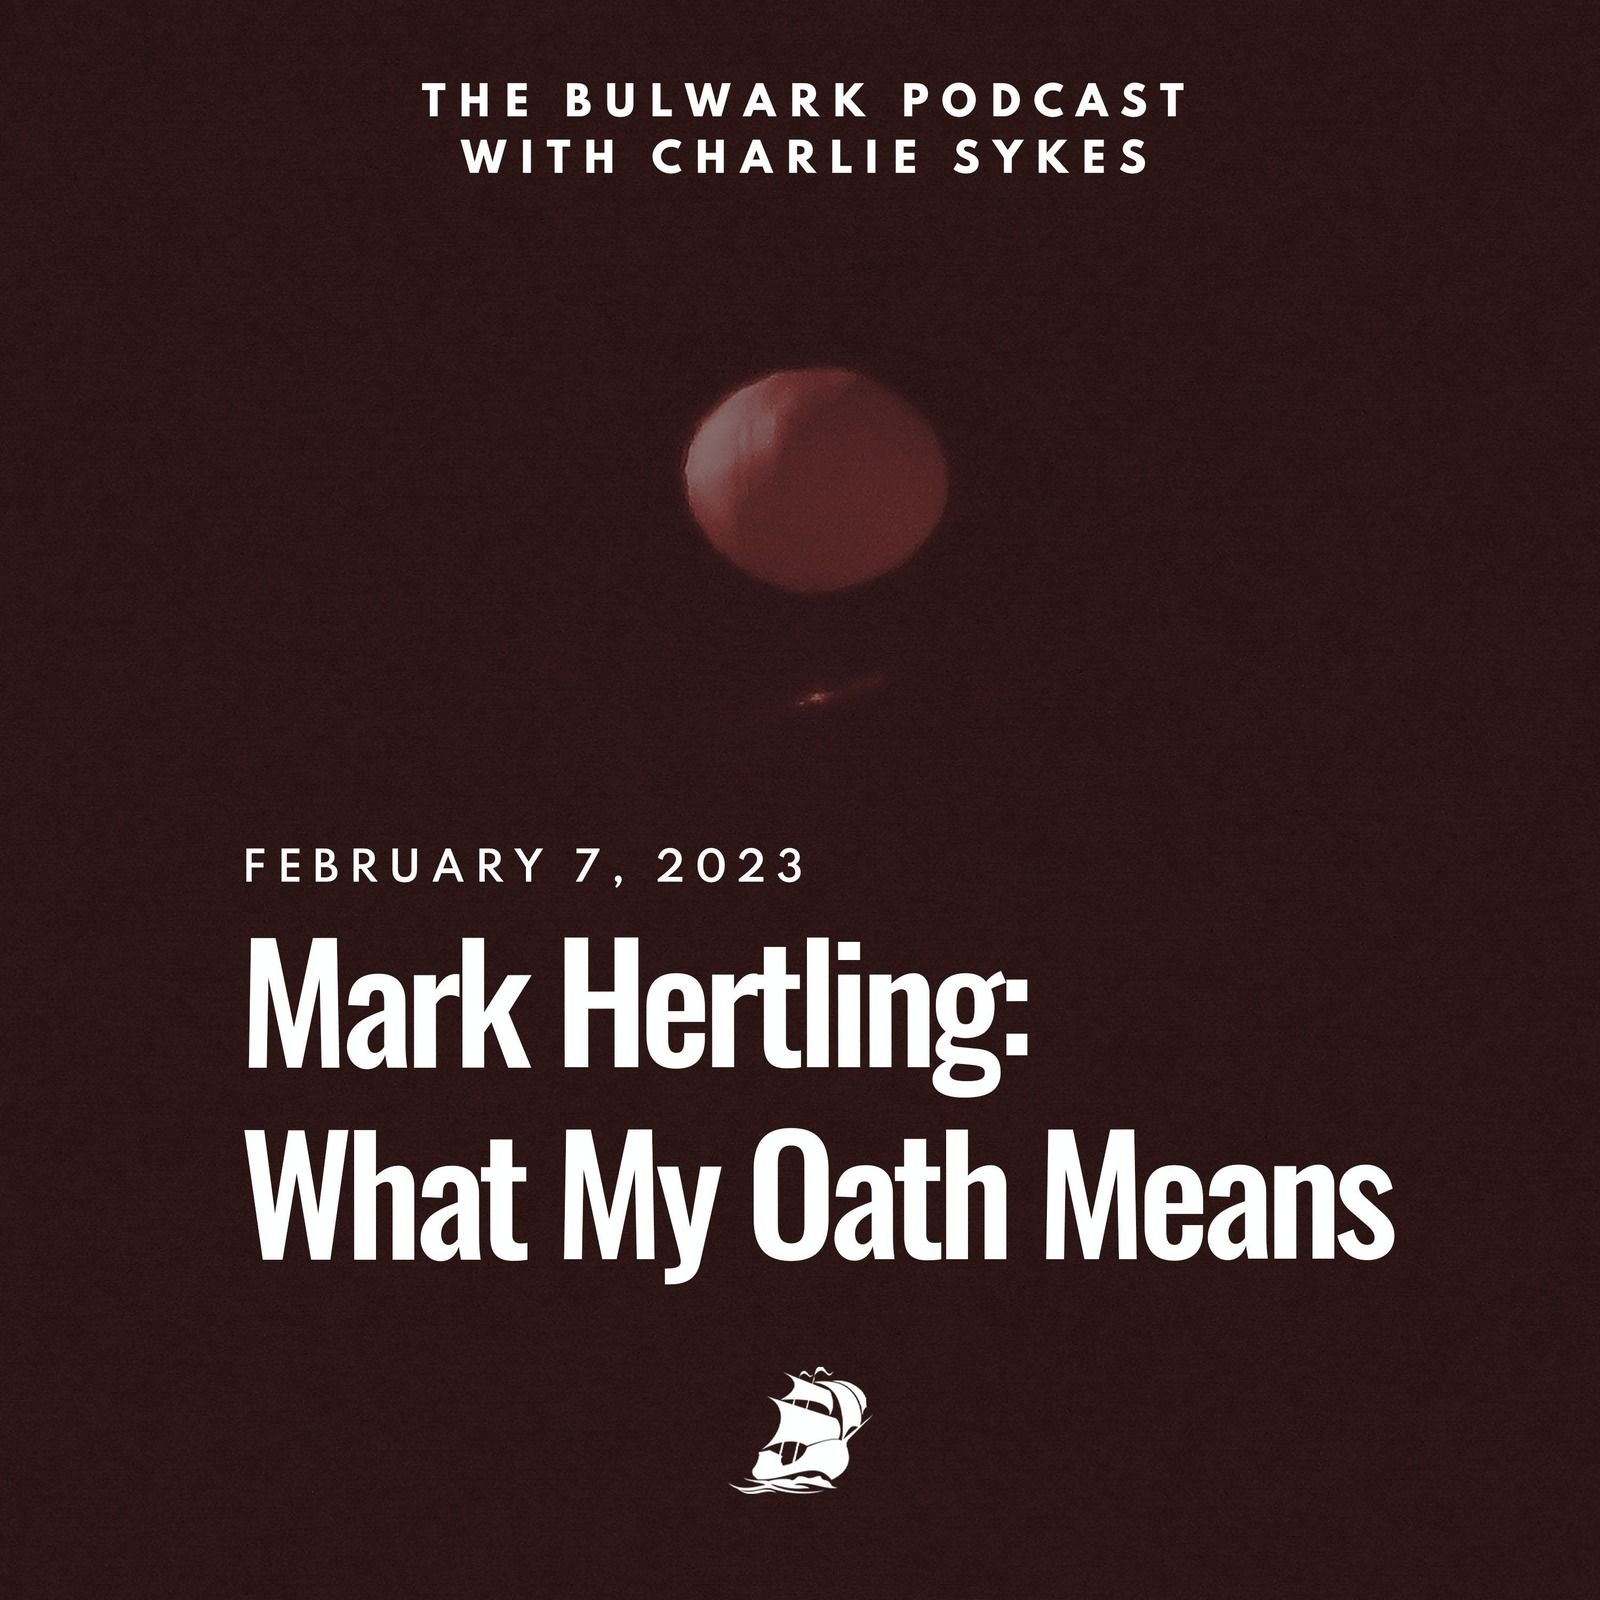 Mark Hertling: What My Oath Means by The Bulwark Podcast